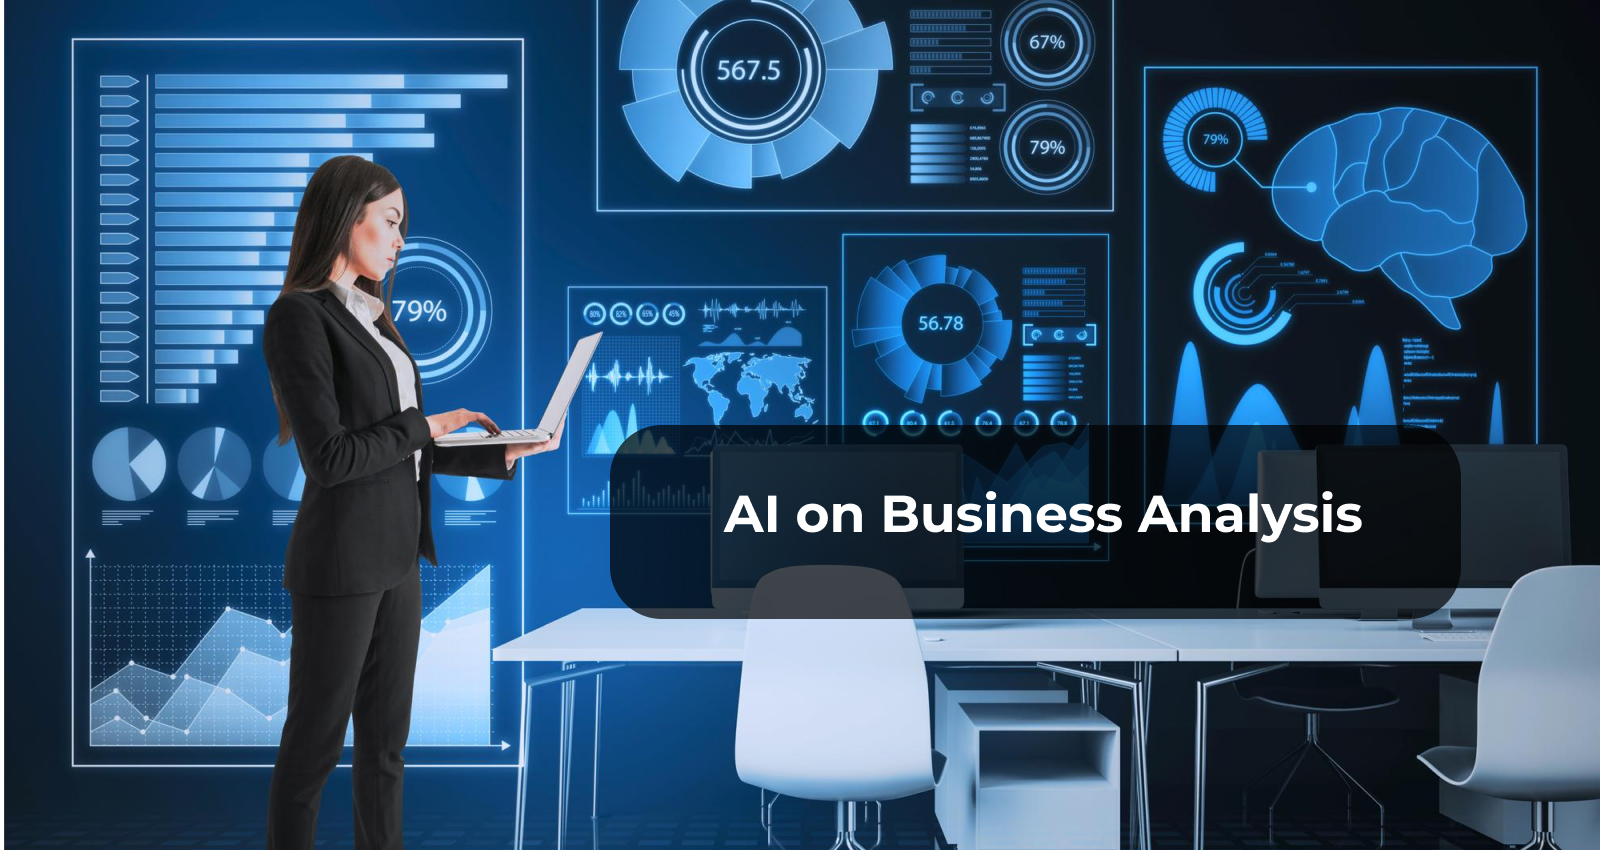 Artificial Intelligence, AI affect on Business Analysis, Business Analysis, AI on Business Analysis, Business Analysis by AI, Impact of AI on Business Analysis